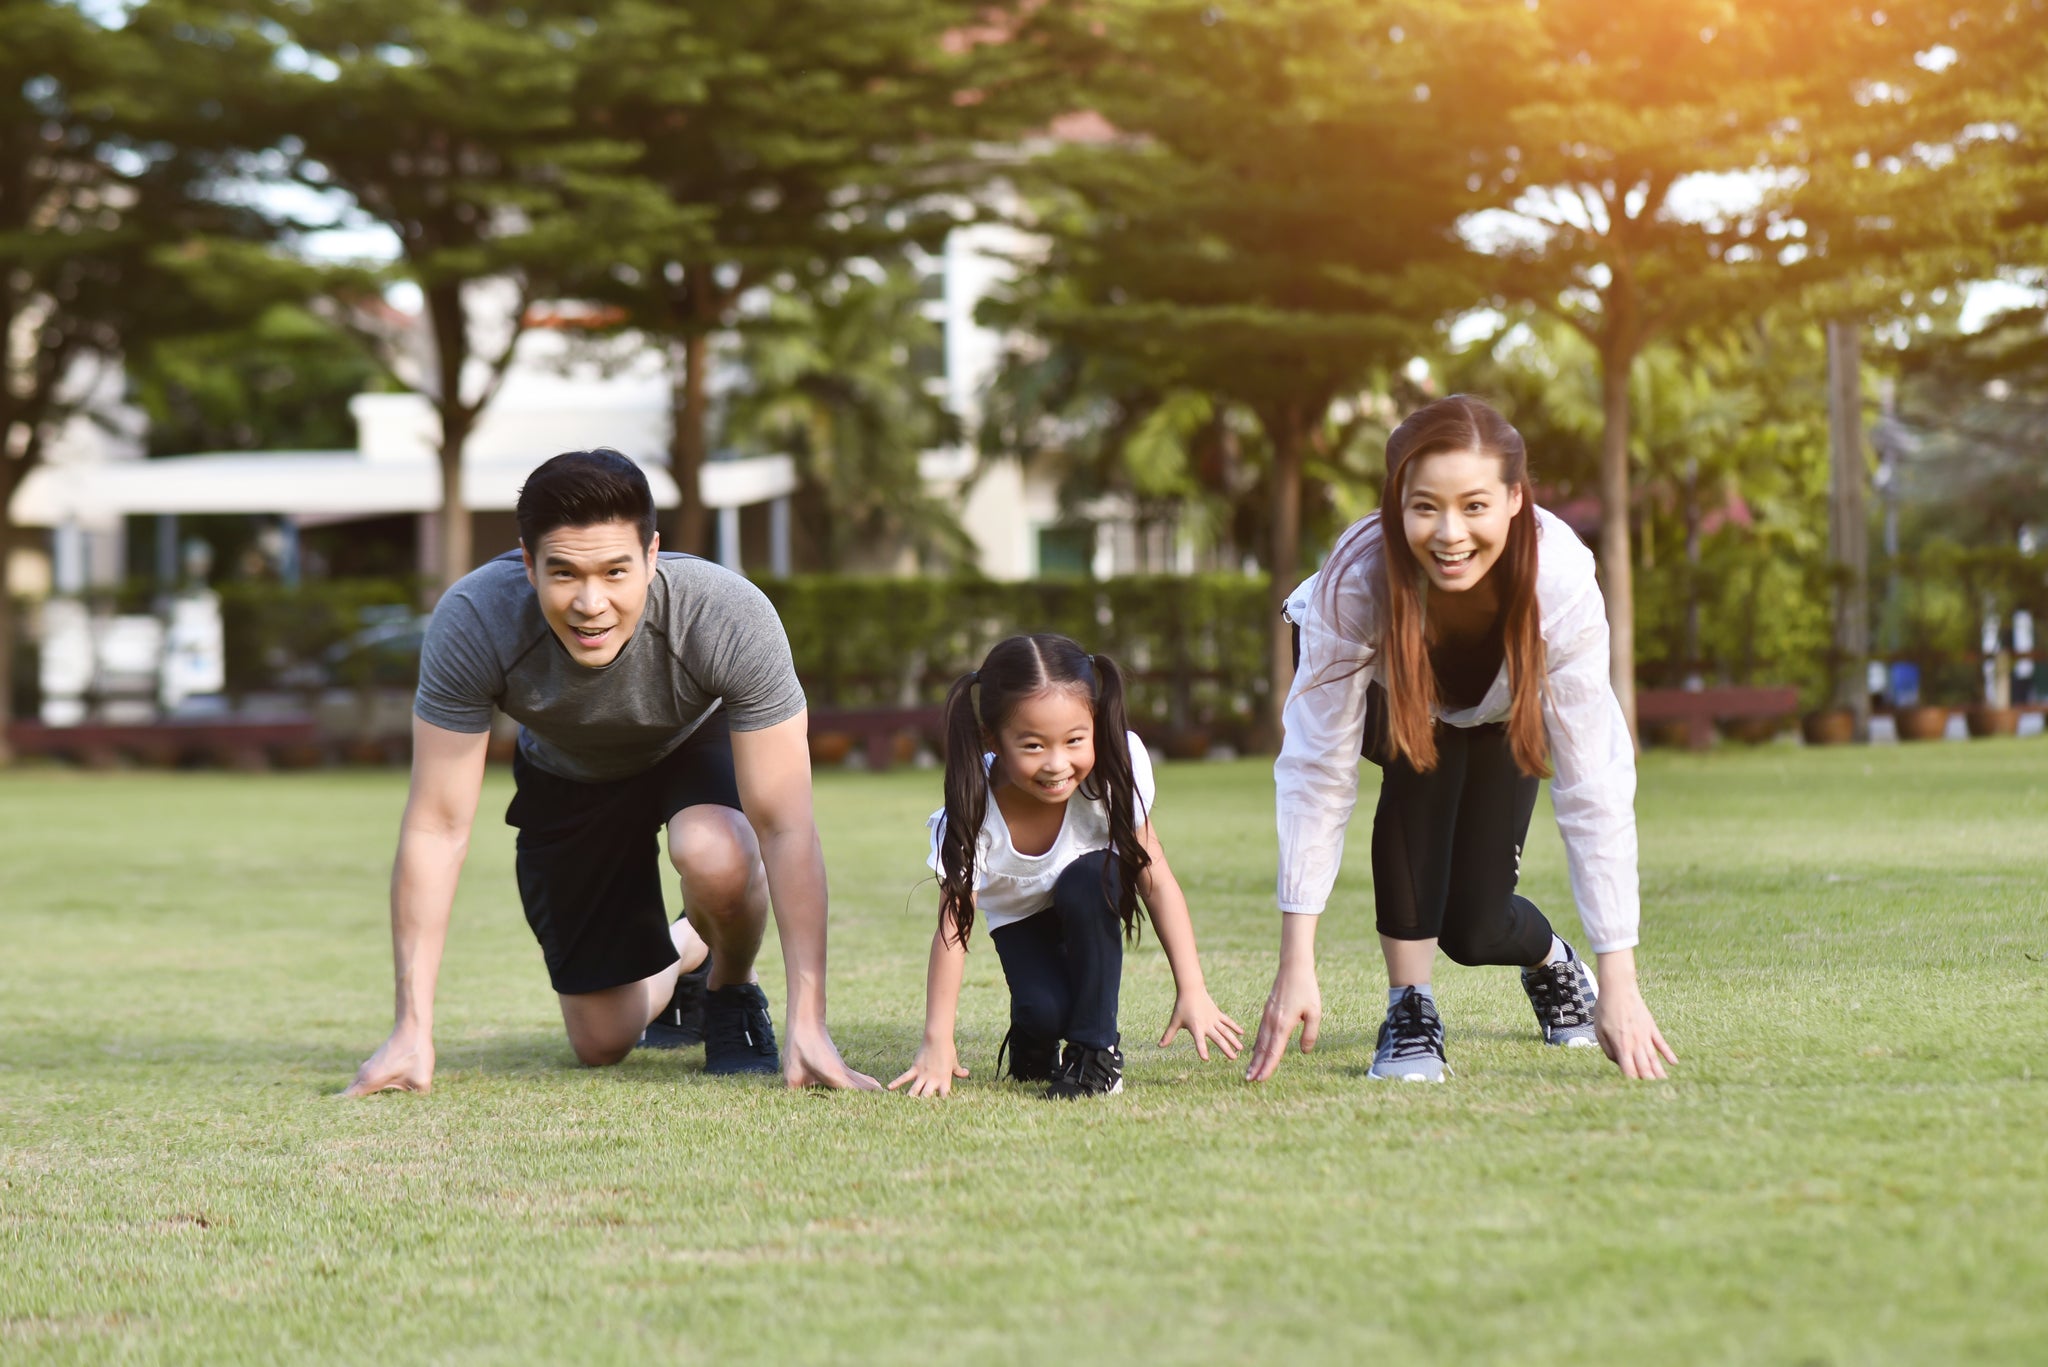 20 Tips for Parenting With An Active Lifestyle